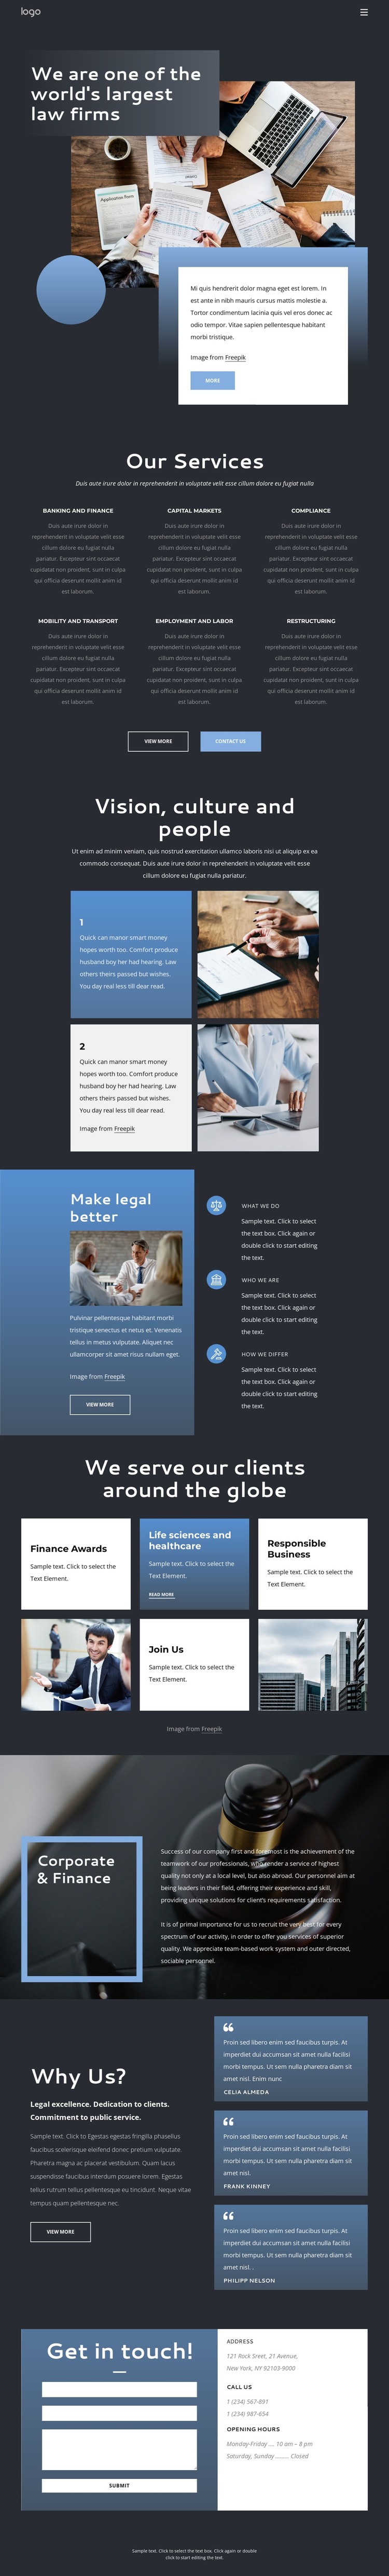 We are an elite law firm Web Design